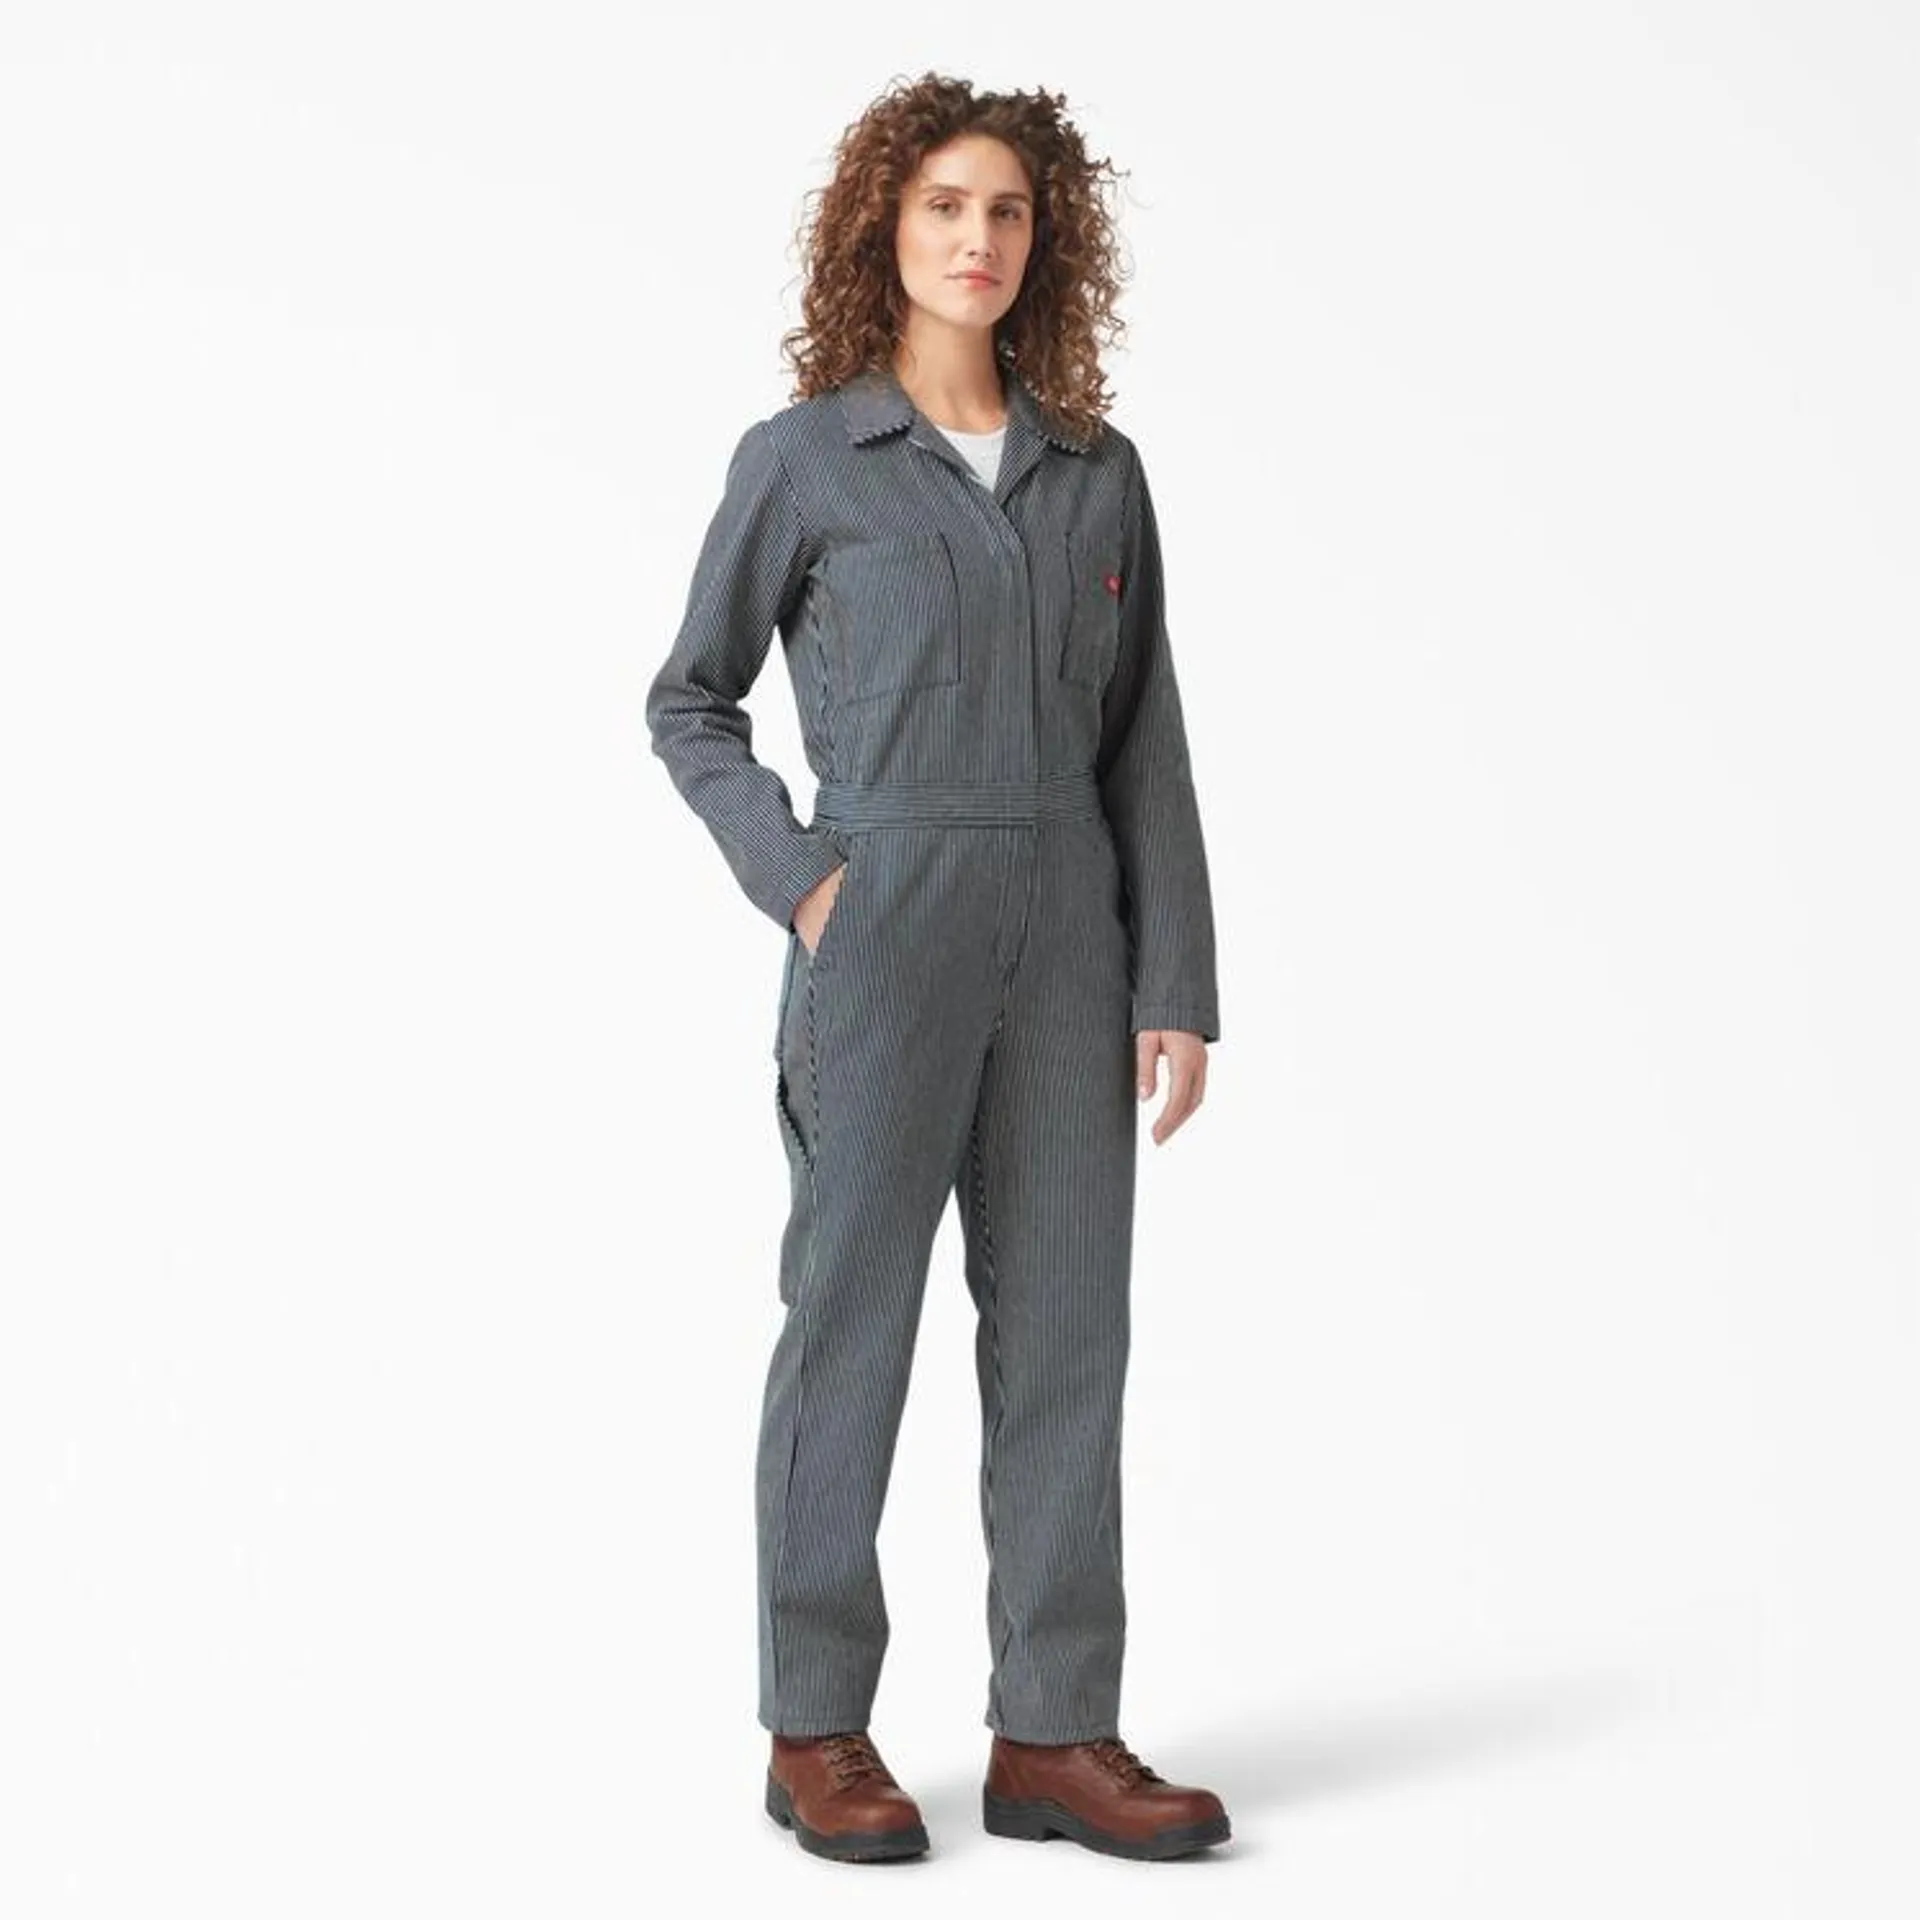 Women's Long Sleeve Hickory Stripe Coveralls, Rinsed Hickory Stripe